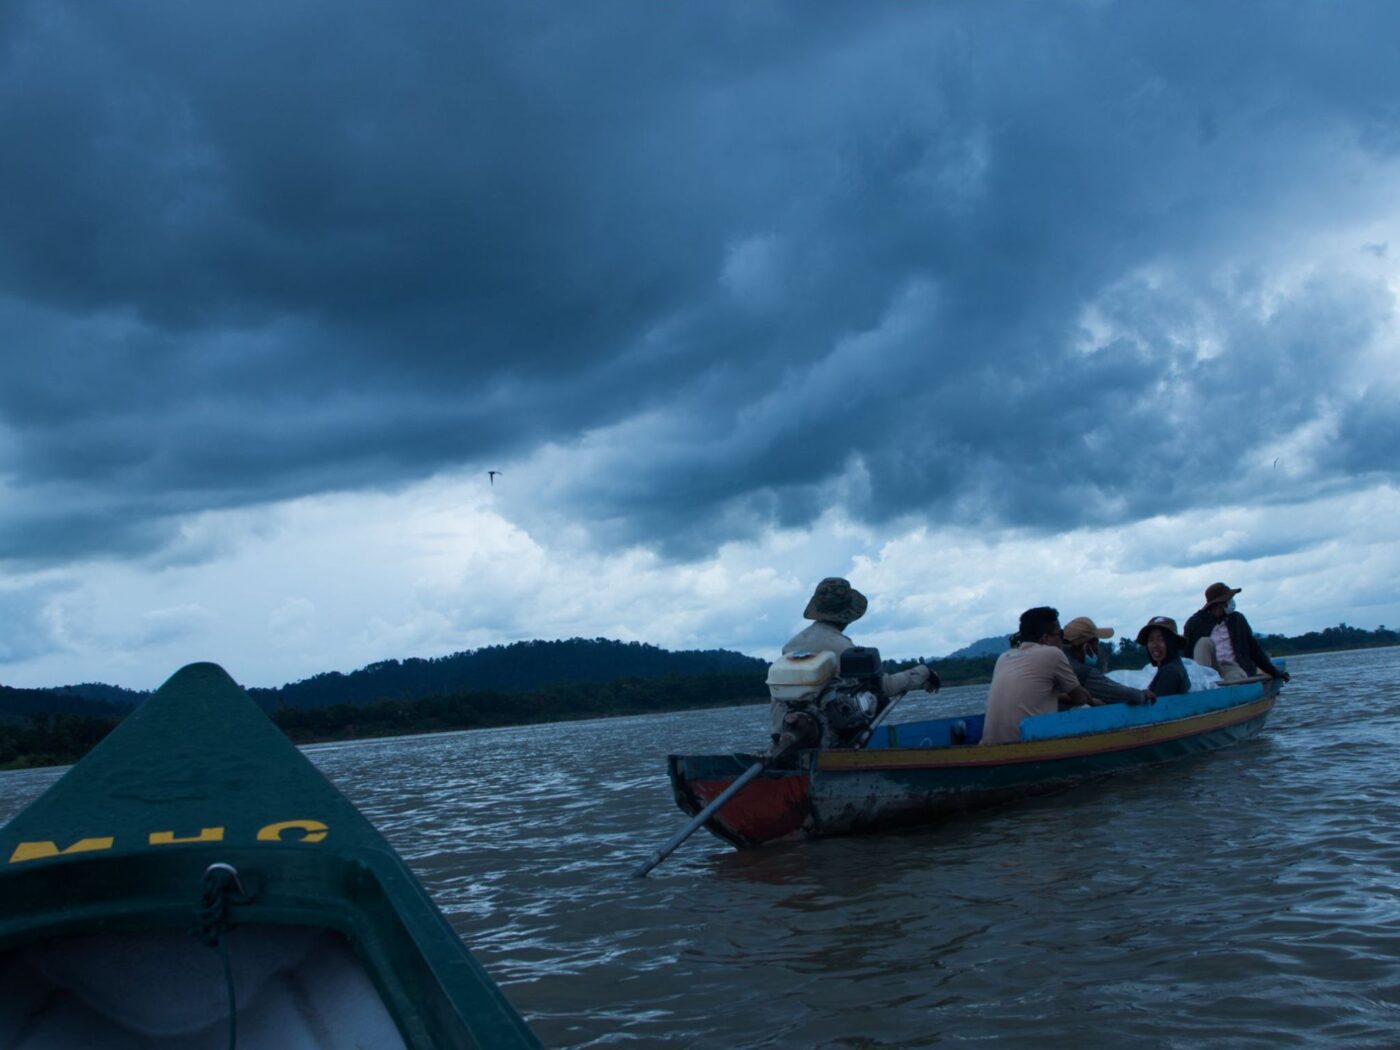 People in a small boat on water as a large storm brews